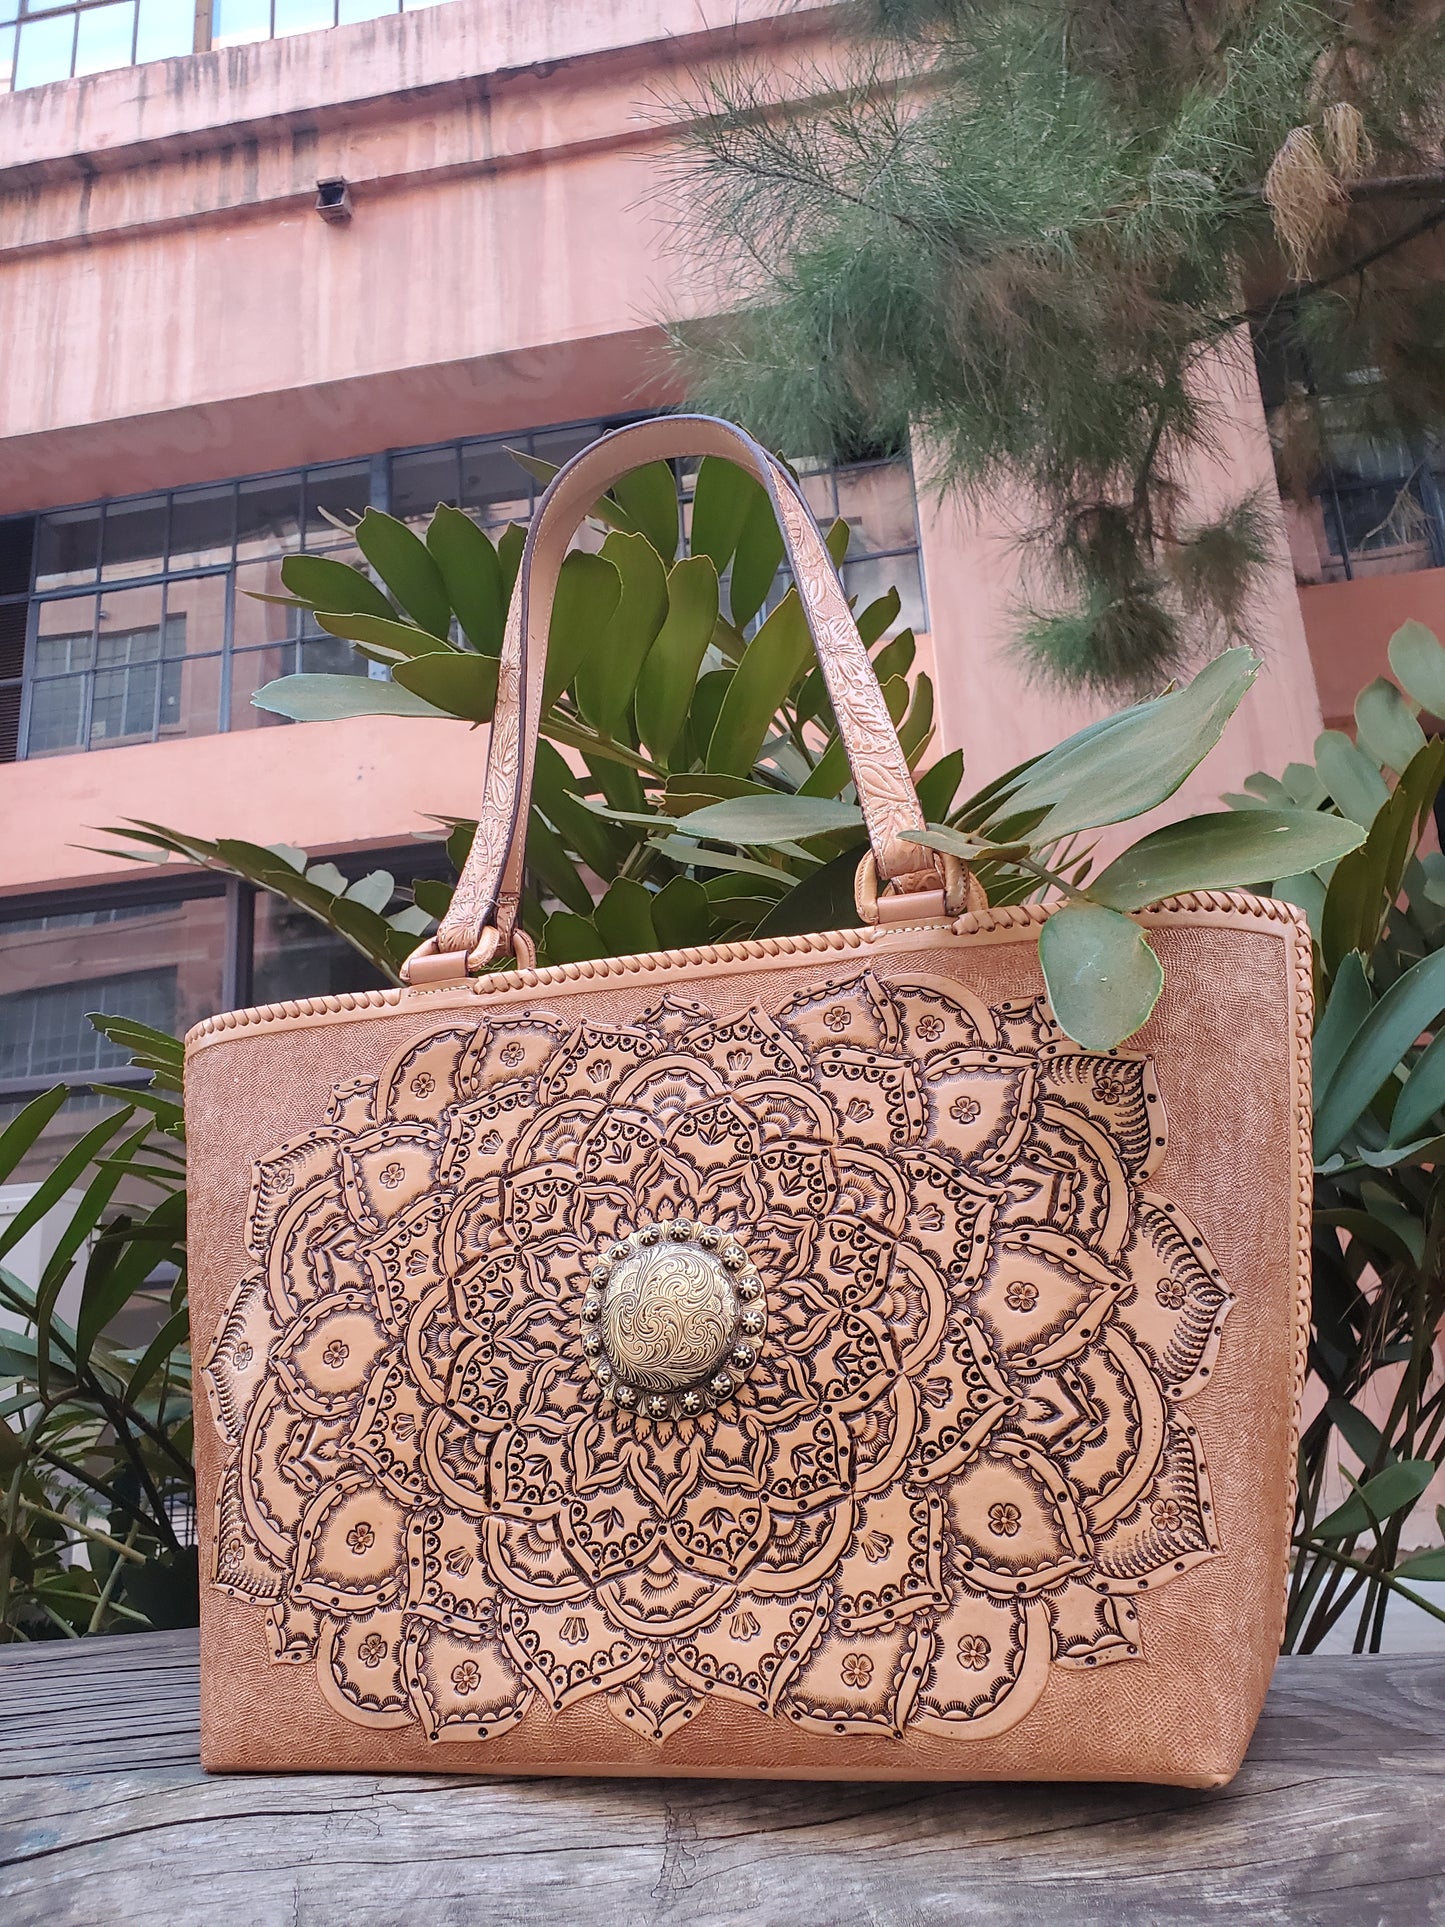 Hand Made Leather Tote Bag "MIA" by MIOHERMOSA Natural Mia Swirls Middle